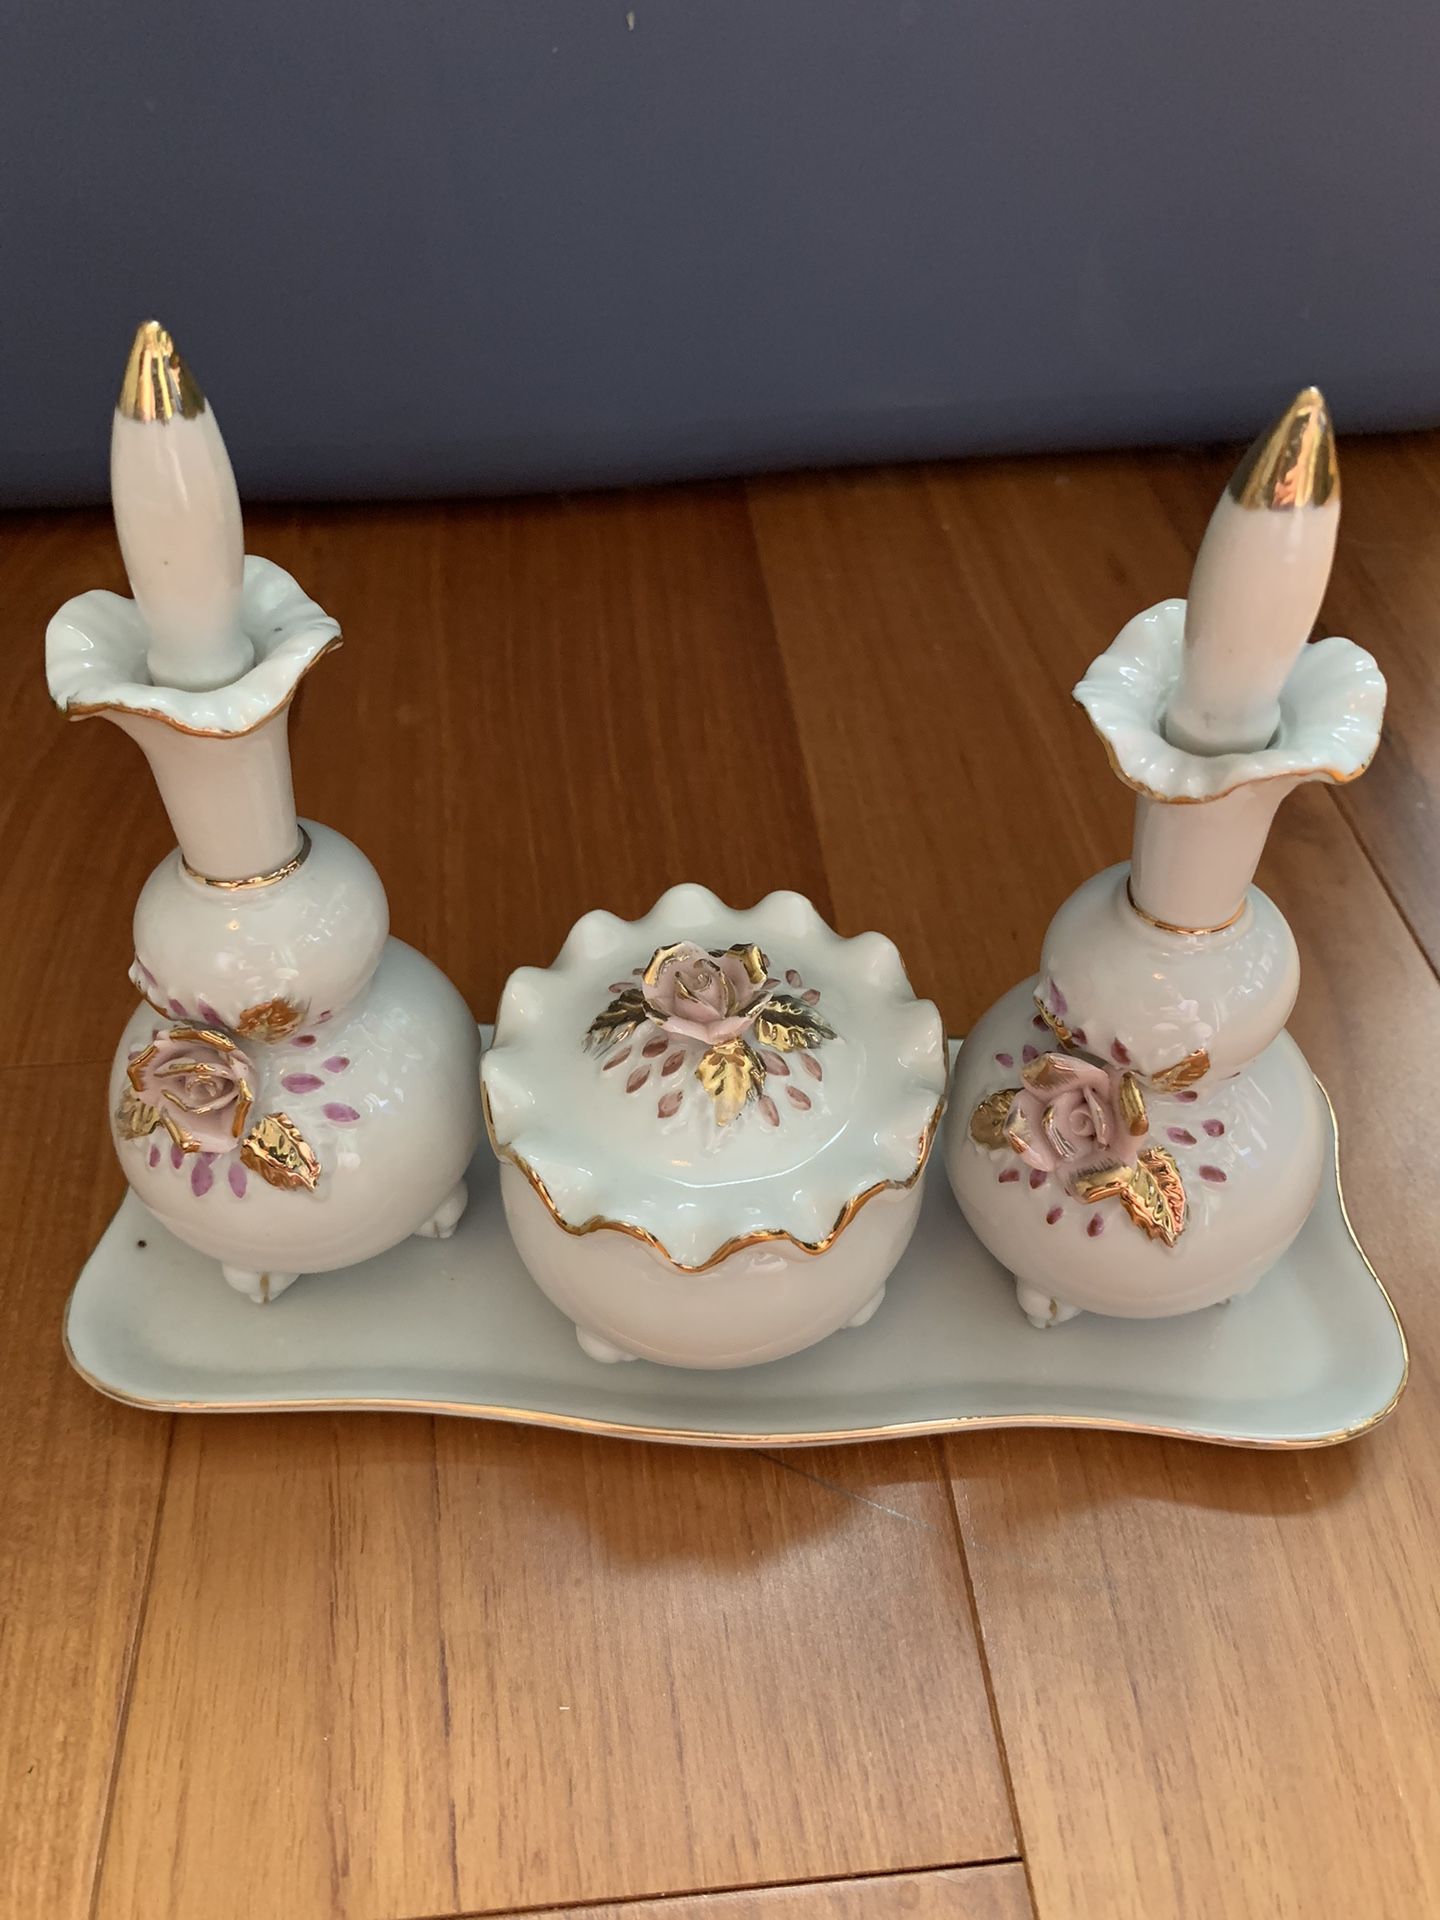 2 antique French porcelain perfume bottles, a porcelain, matching ring holder and a matching porcelain tray